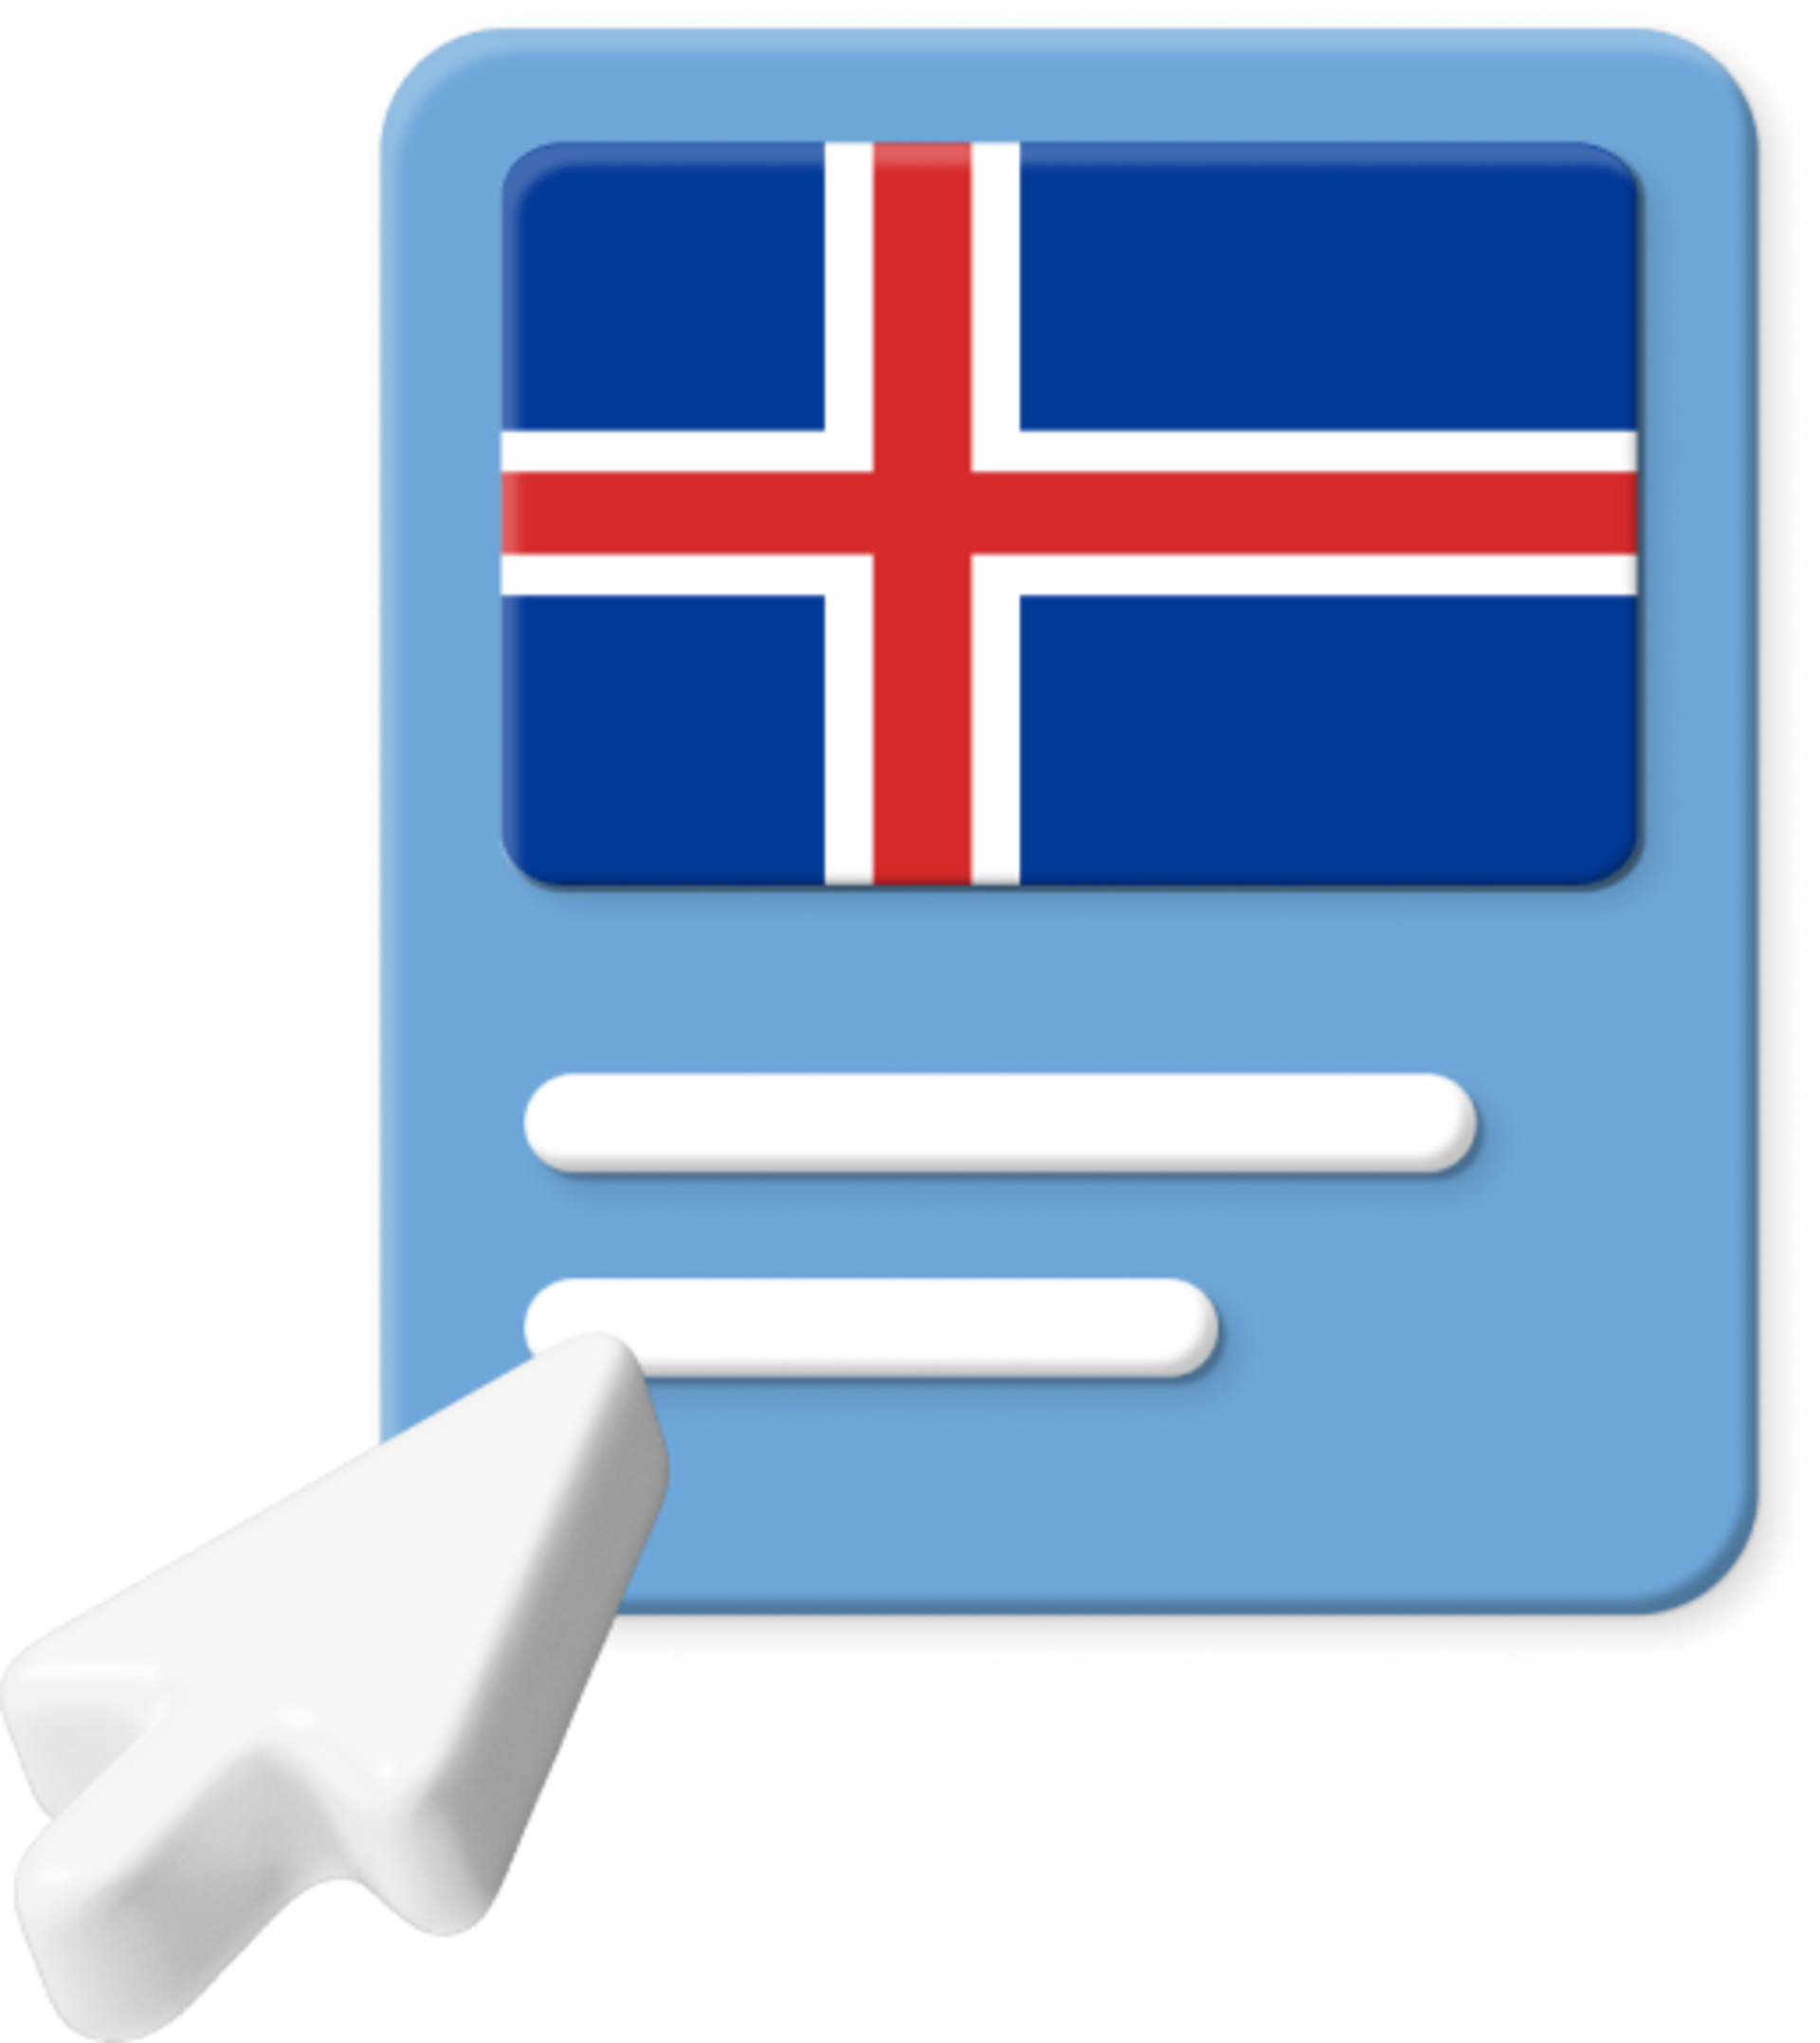 Iceland flag with large cursor icon